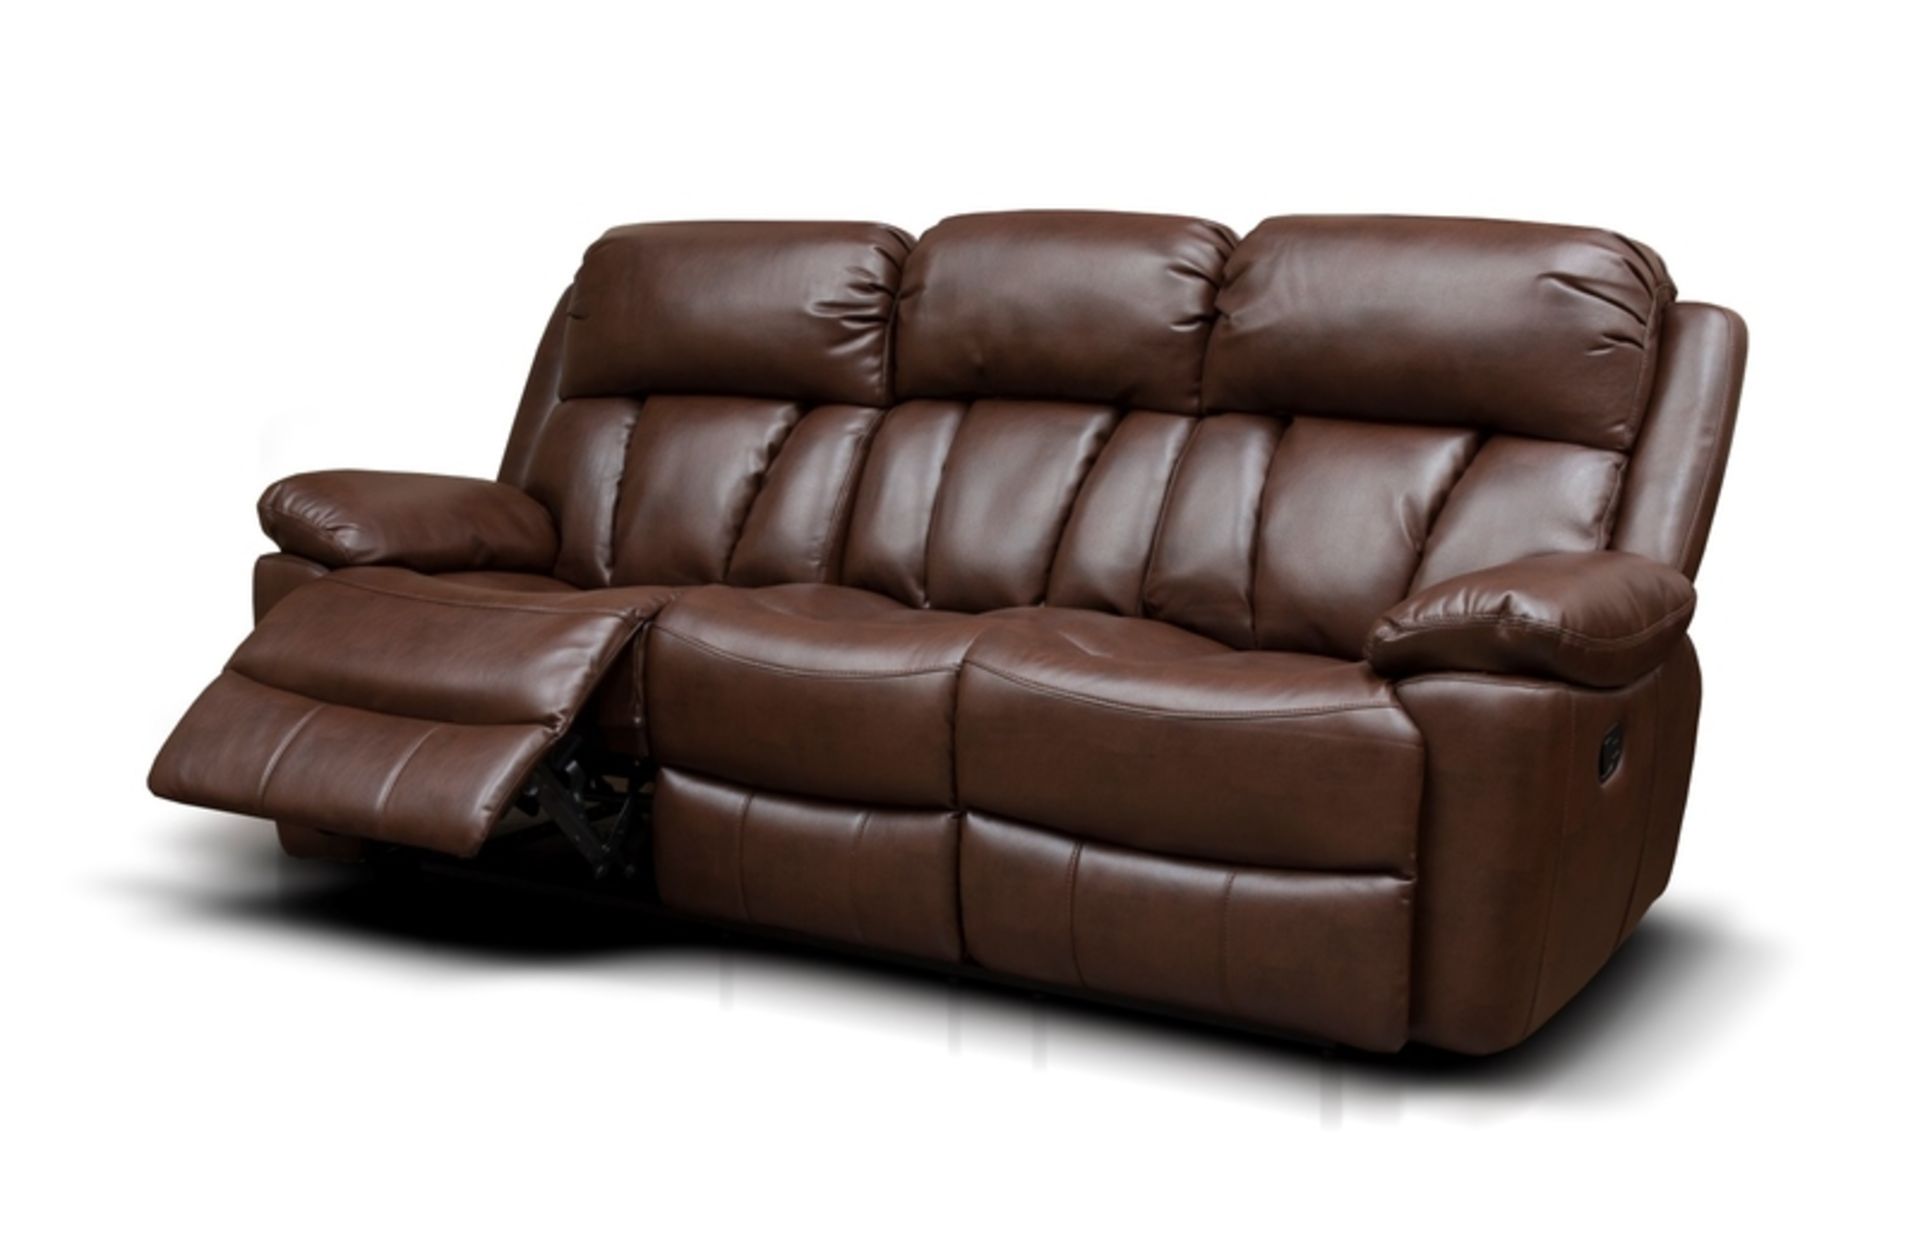 Brand New Boxed Benson 3 Seater Brown Leatheraire Reclining Sofa Plus 2 Matching Arm Chairs - Image 2 of 3